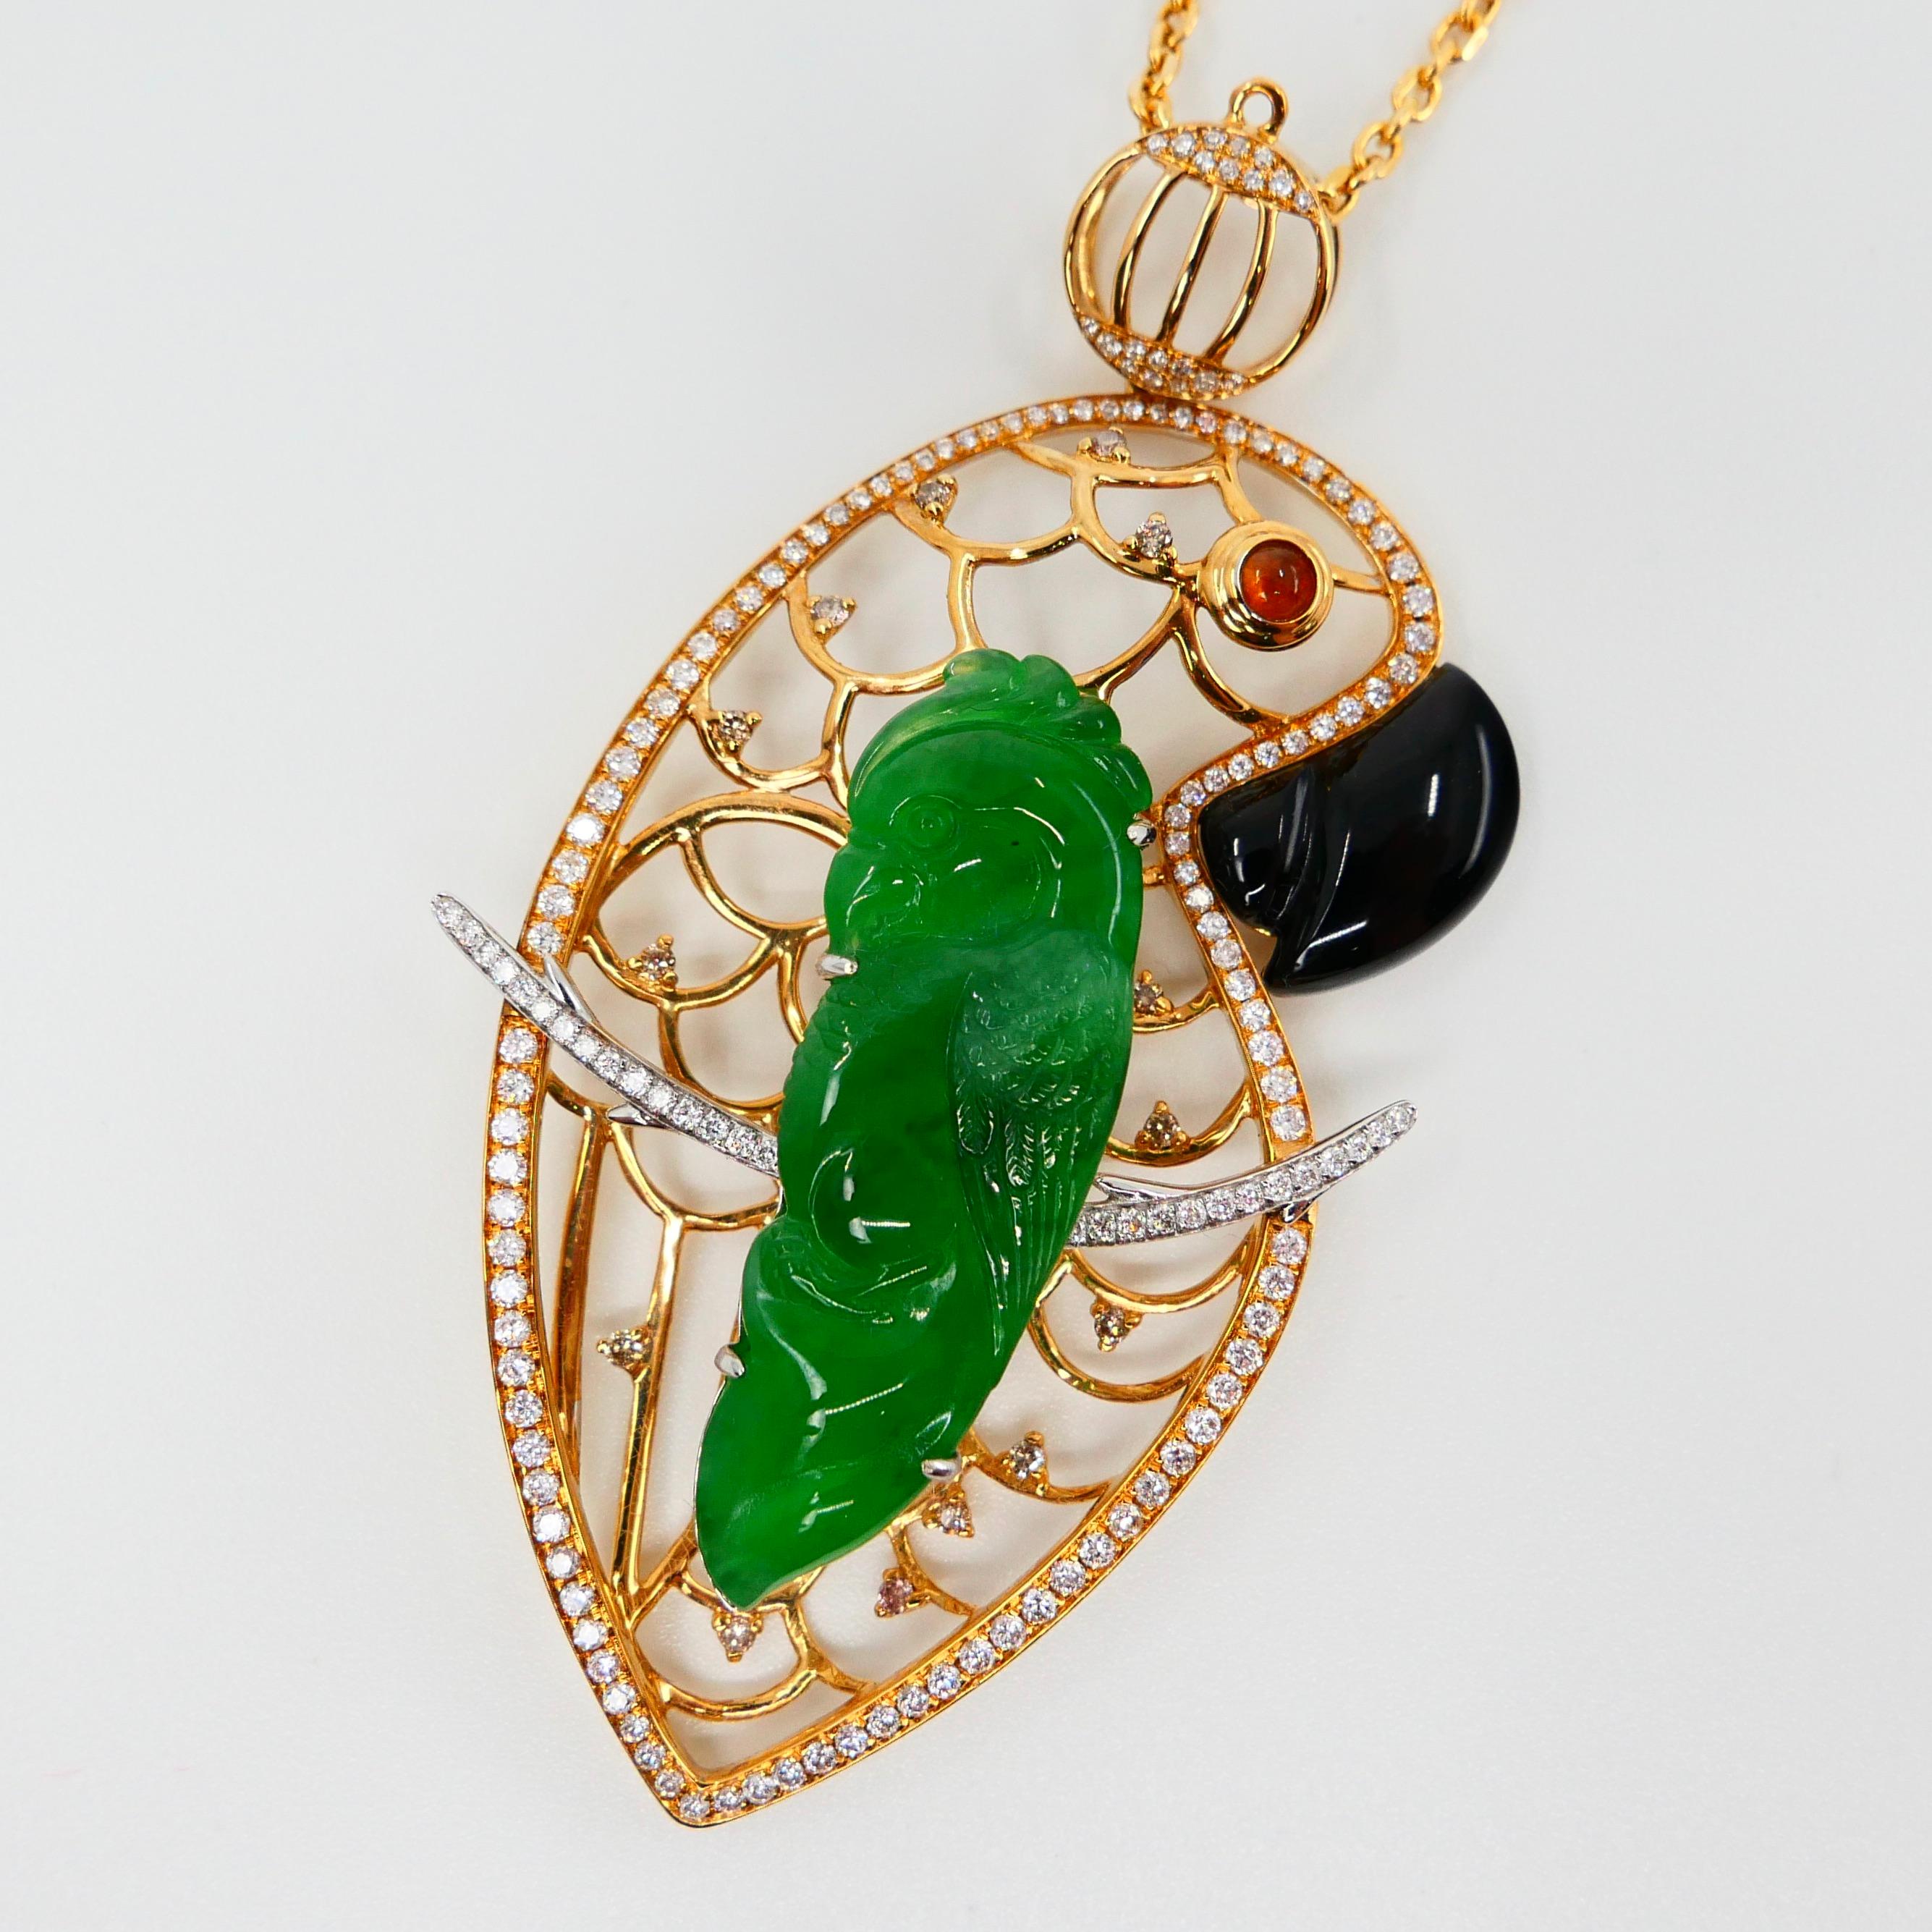 Certified Type A Jadeite Jade and Diamond Parrot Pendant, Vivid Green Color For Sale 3